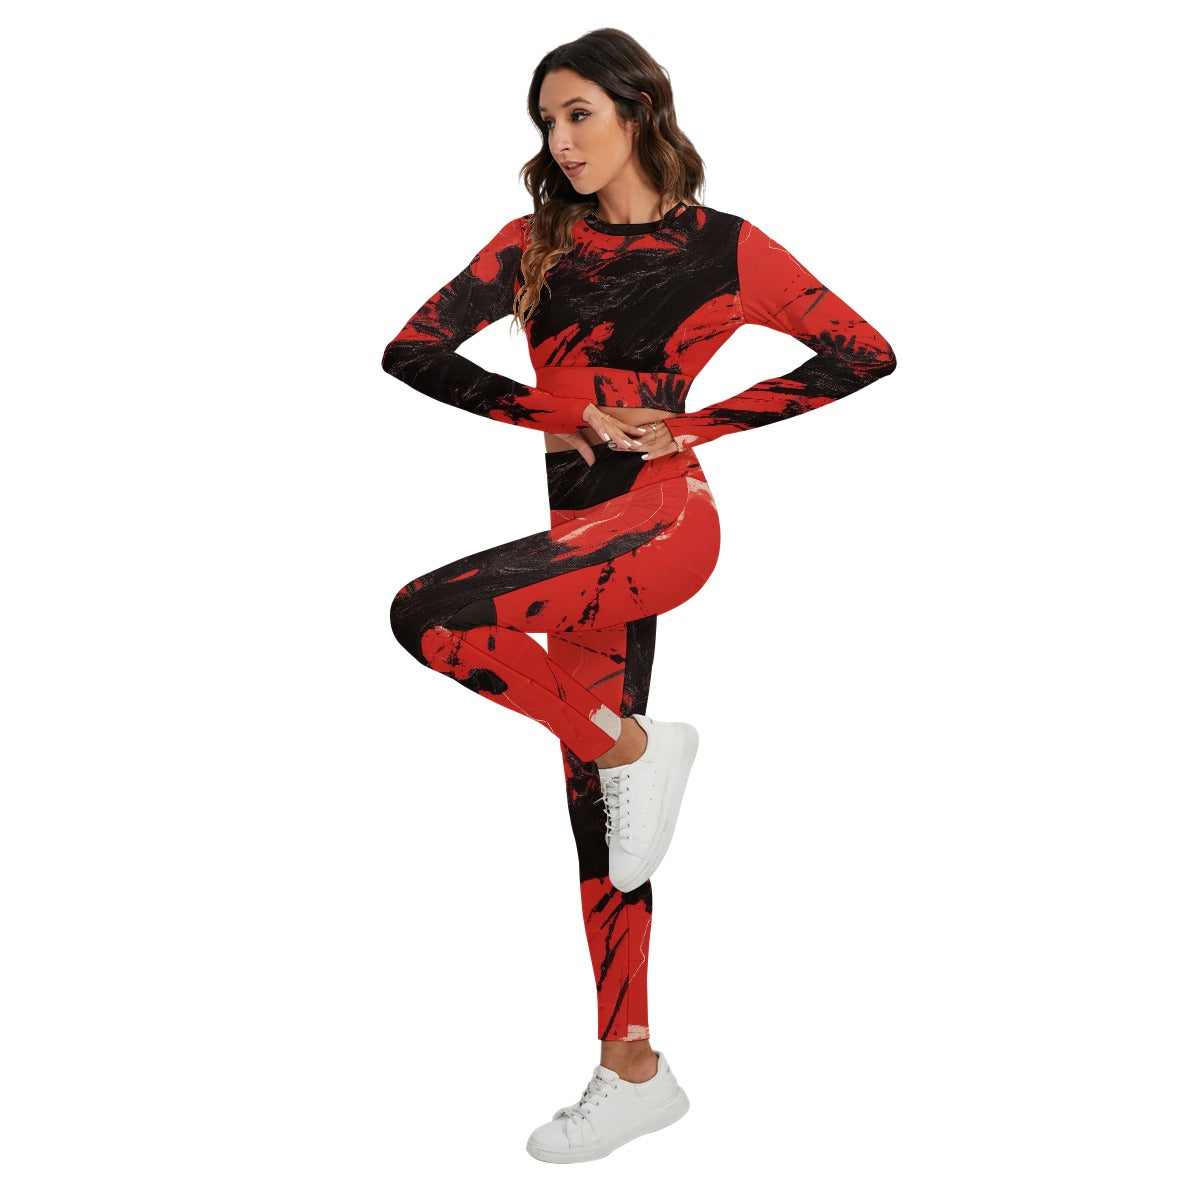 Signature Series red/black All-Over Print Women's Sport Set With Backless Top And Leggings